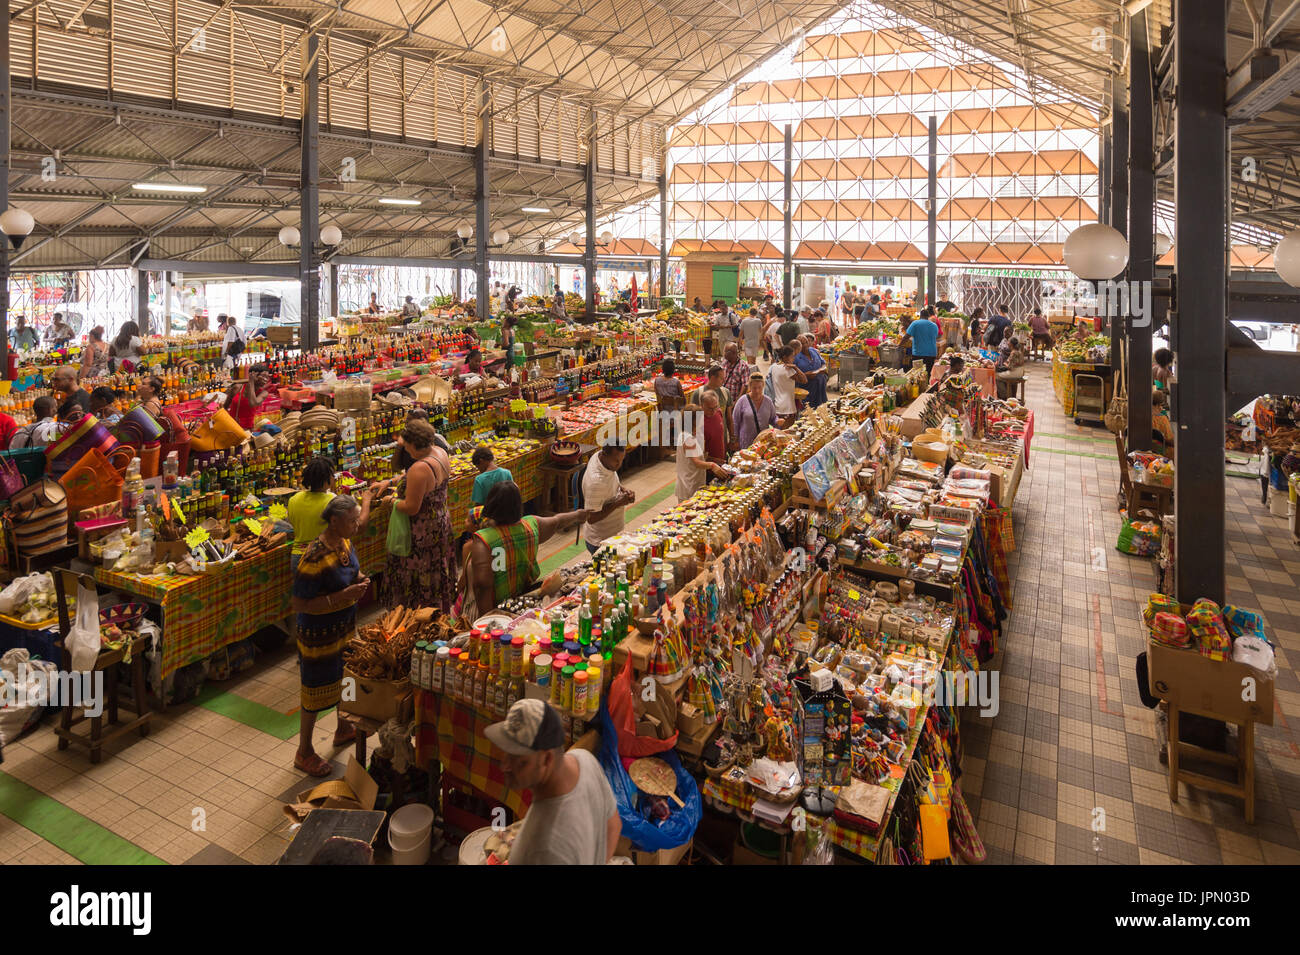 Covered Market in Fort-De-France, Martinique Island, West Indies Stock Photo